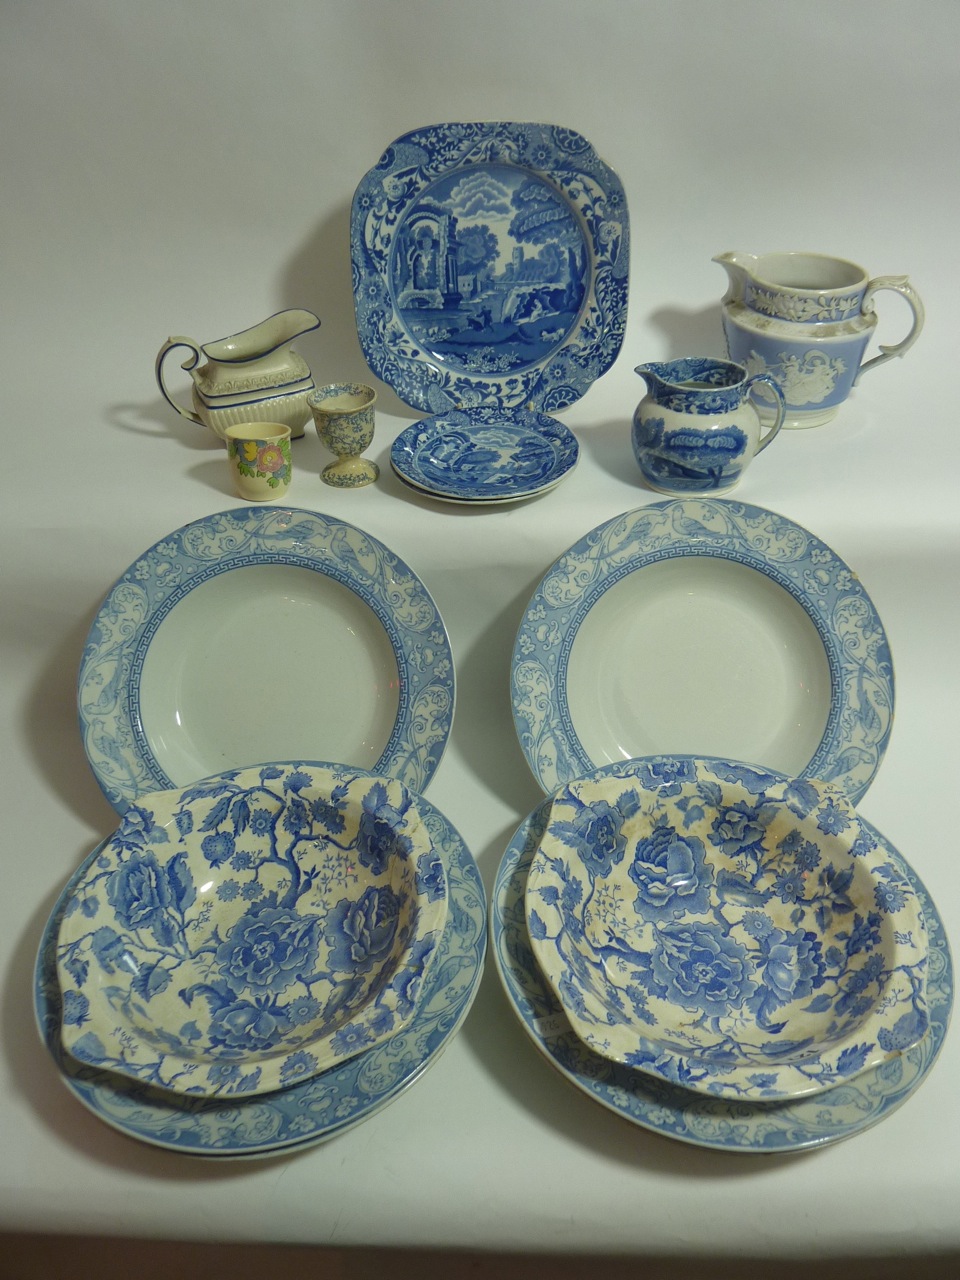 Two Johnson Brothers "English Chippendale" bowls, a Spode "Italian" plate, jug and two saucers,